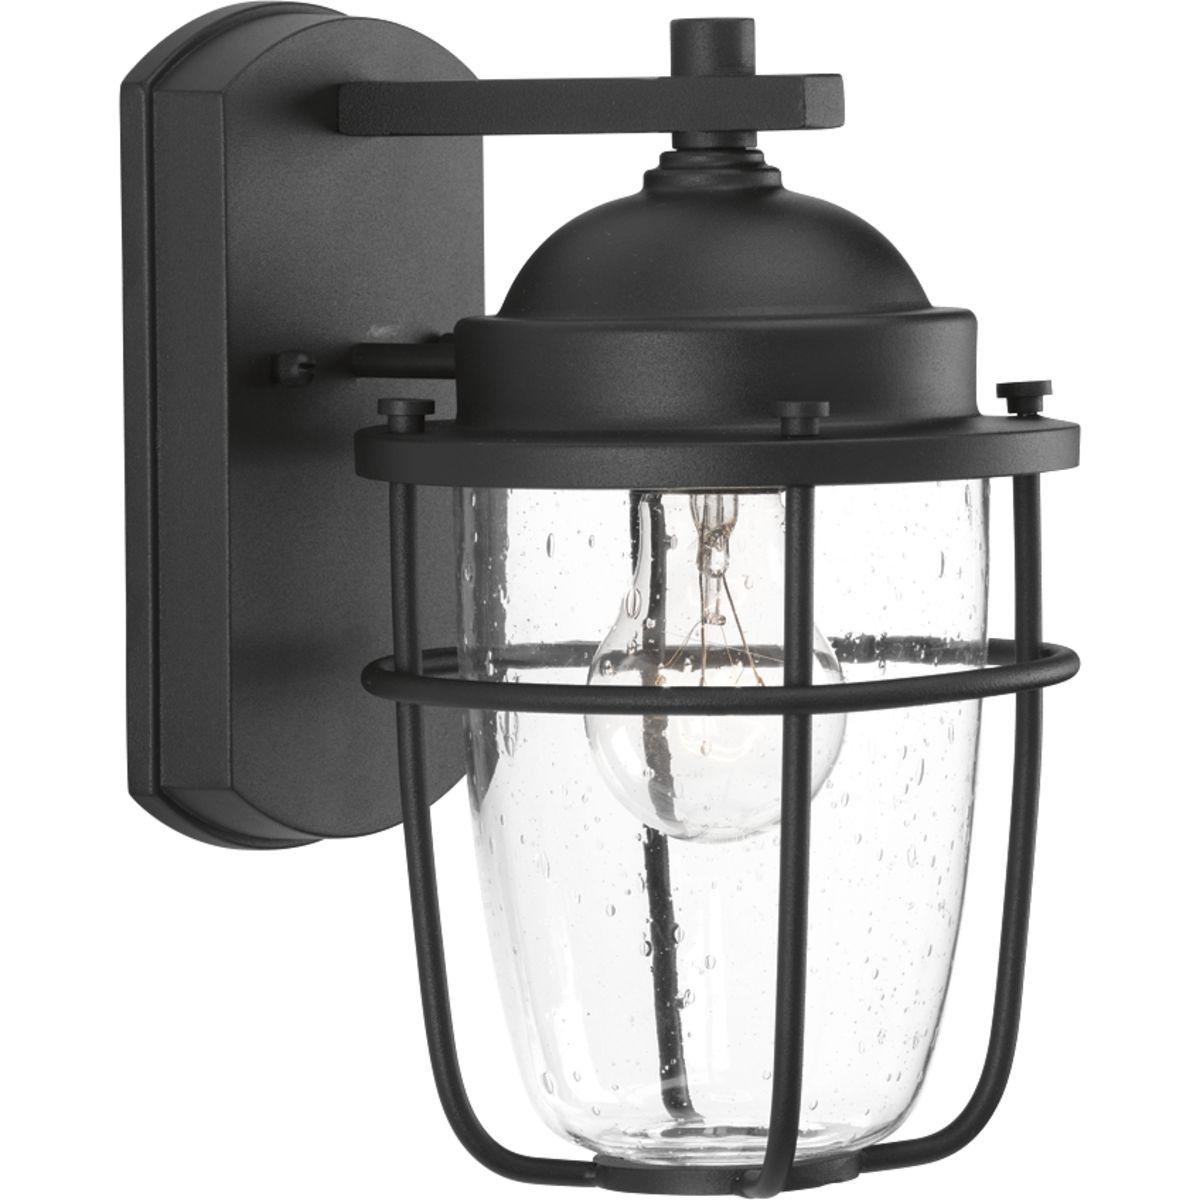 Hubbell P560065-031 A nautical-inspired collection ideal for a variety of exteriors, including Coastal, Transitional and Urban Industrial settings. The one-light black small wall lantern with clear seeded glass feature a hint of brushed nickel on the interior. Geometric deta